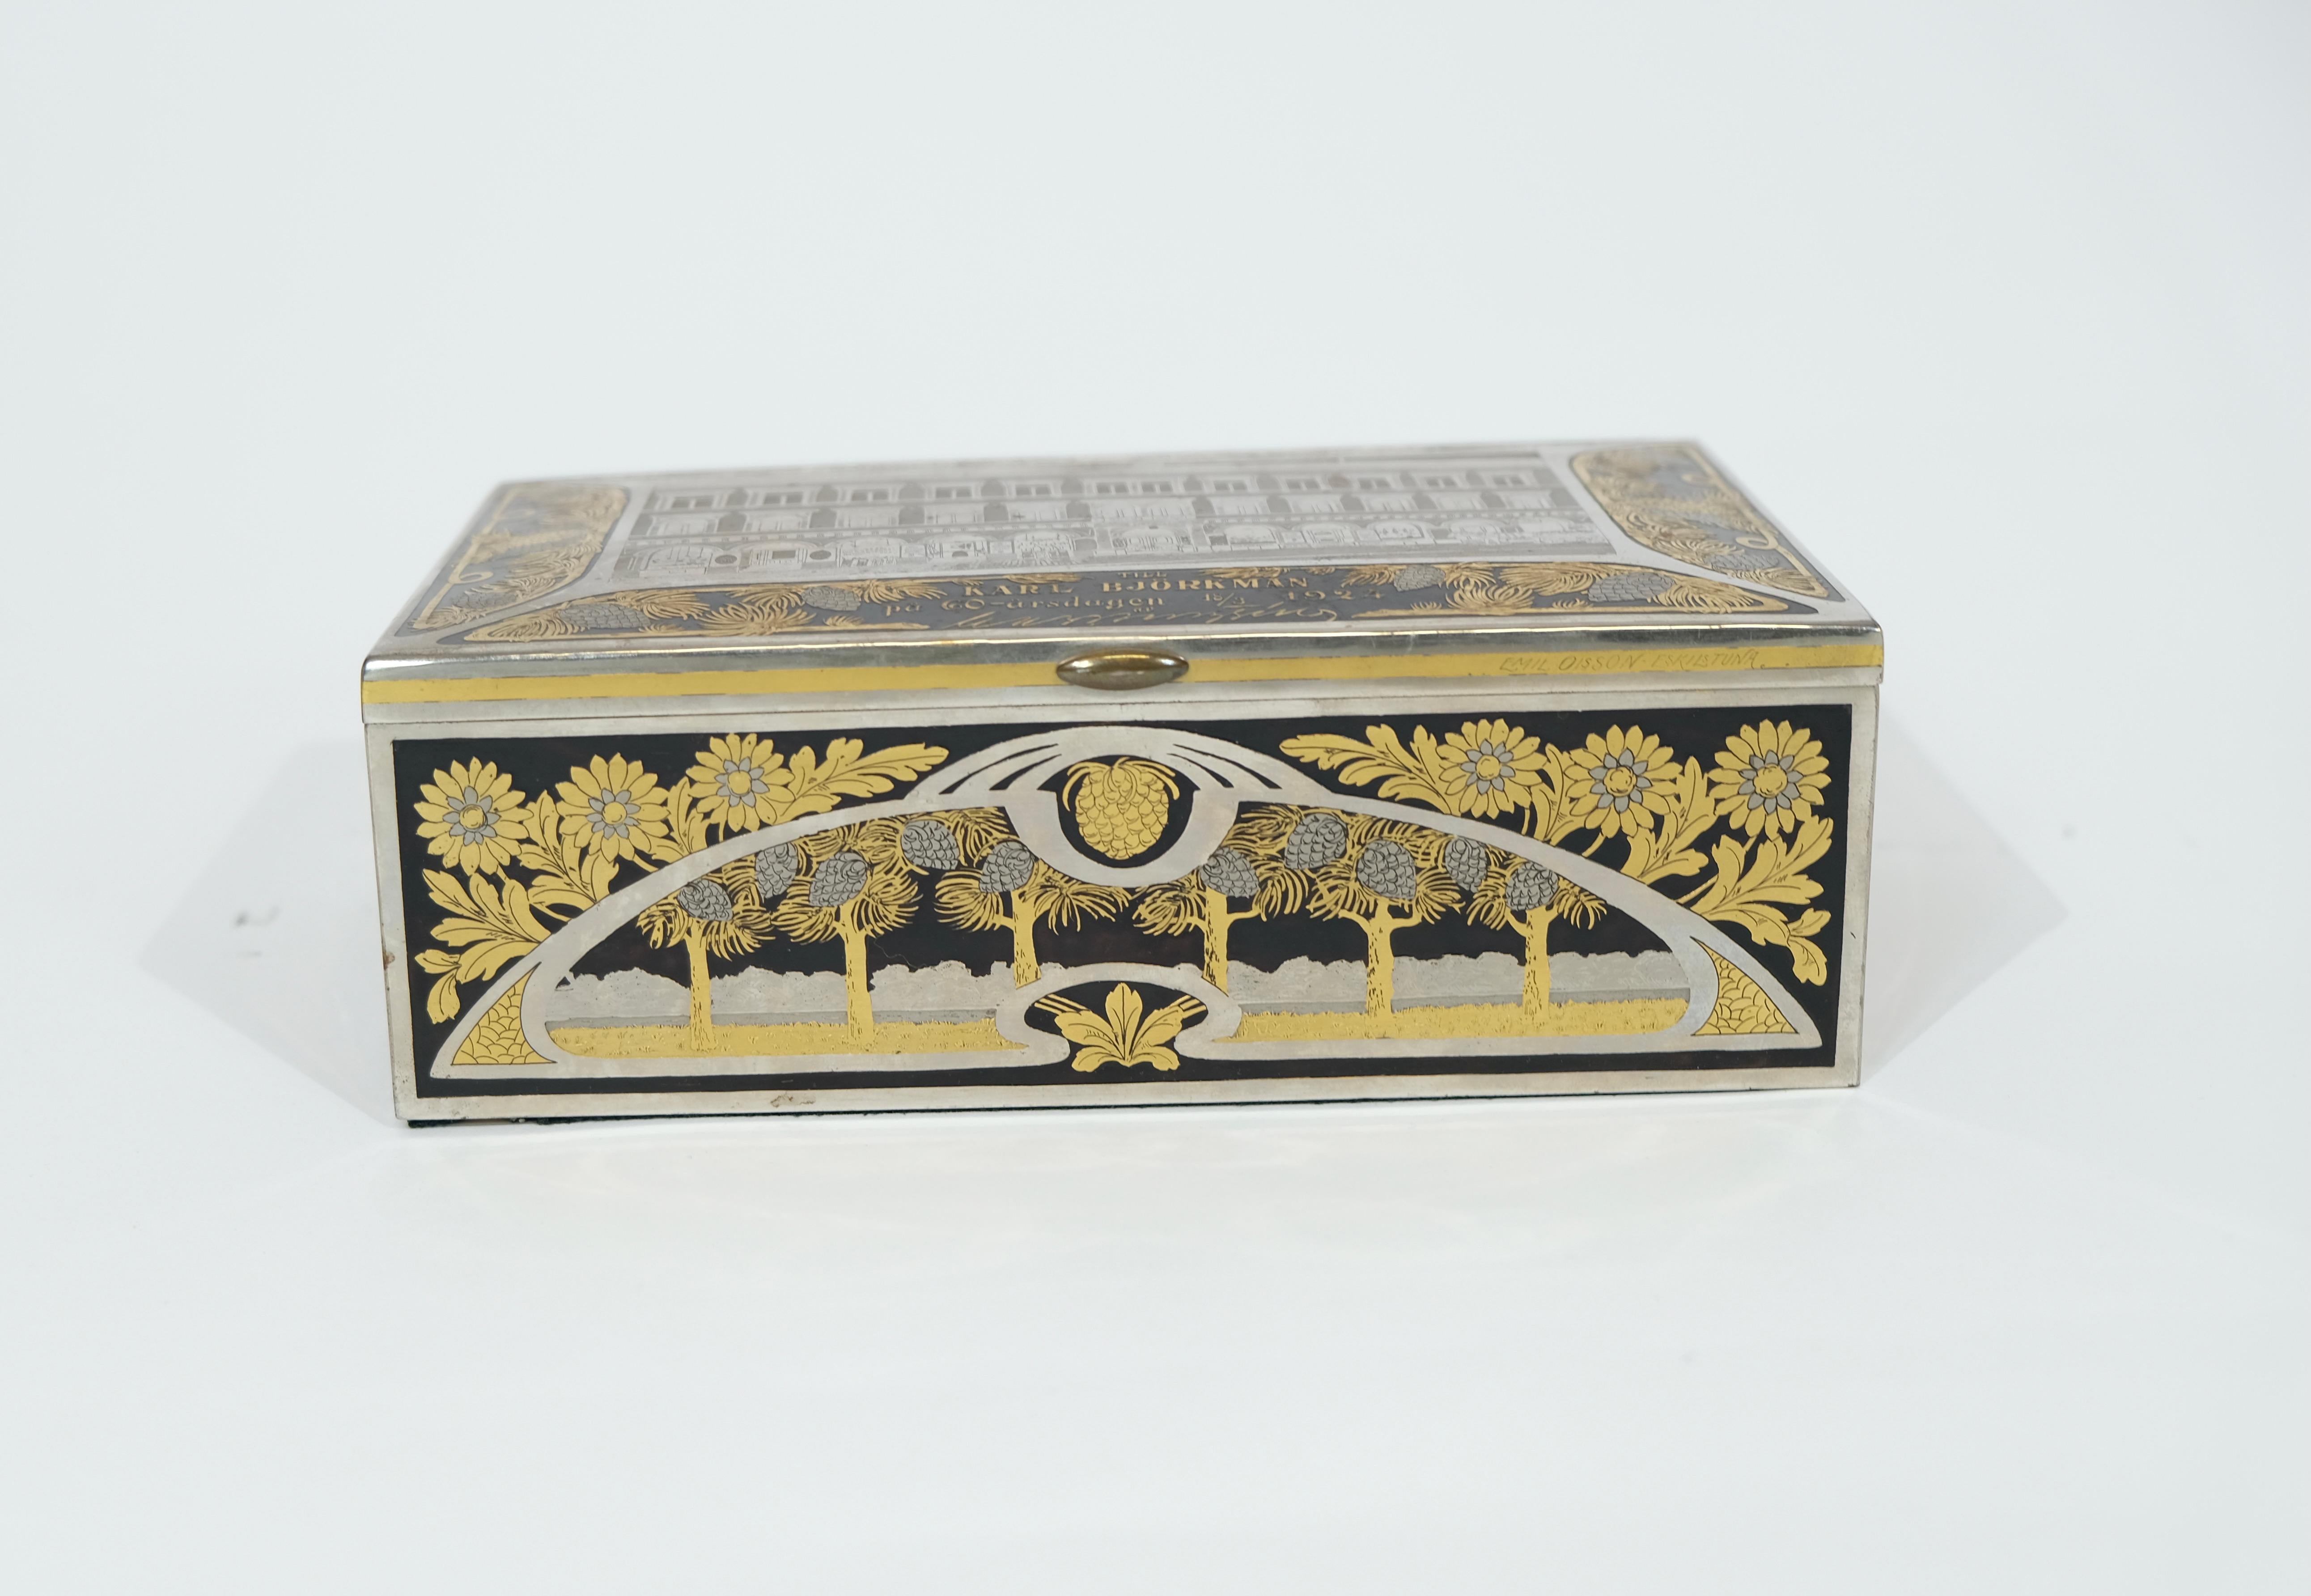 A steel cigar box made around 1920. The steel is gilt and bluished with the technique that often was used by specialized workshops in Eskilstuna, Sweden. The quality is very high as always on the works from this workshop. Signed Emil Olsson,